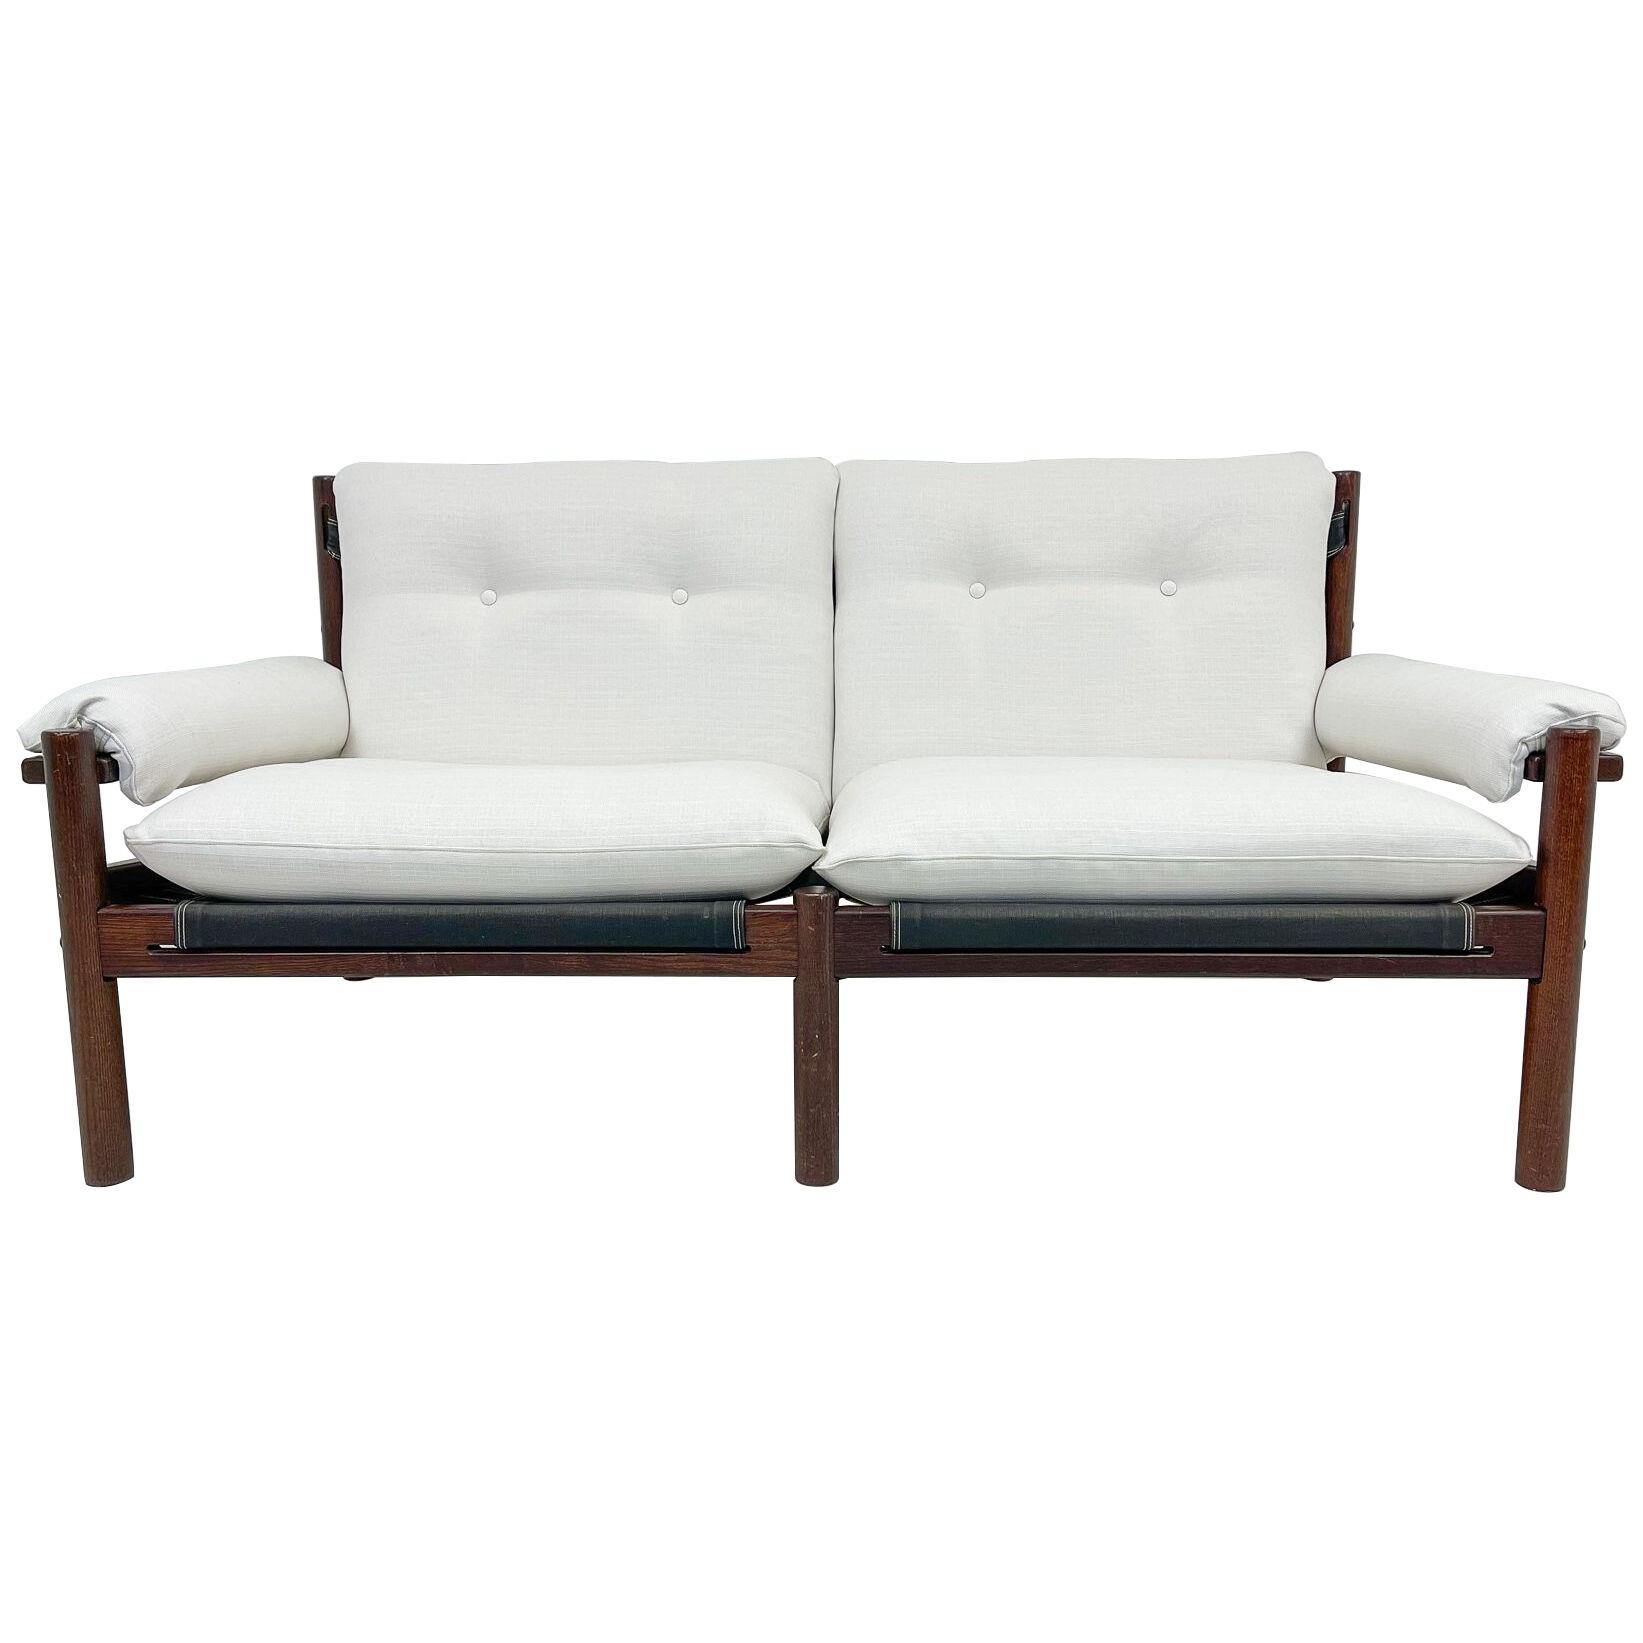 Scandinavian Modern 2 Seat Sofa White Textile and Stained Wood